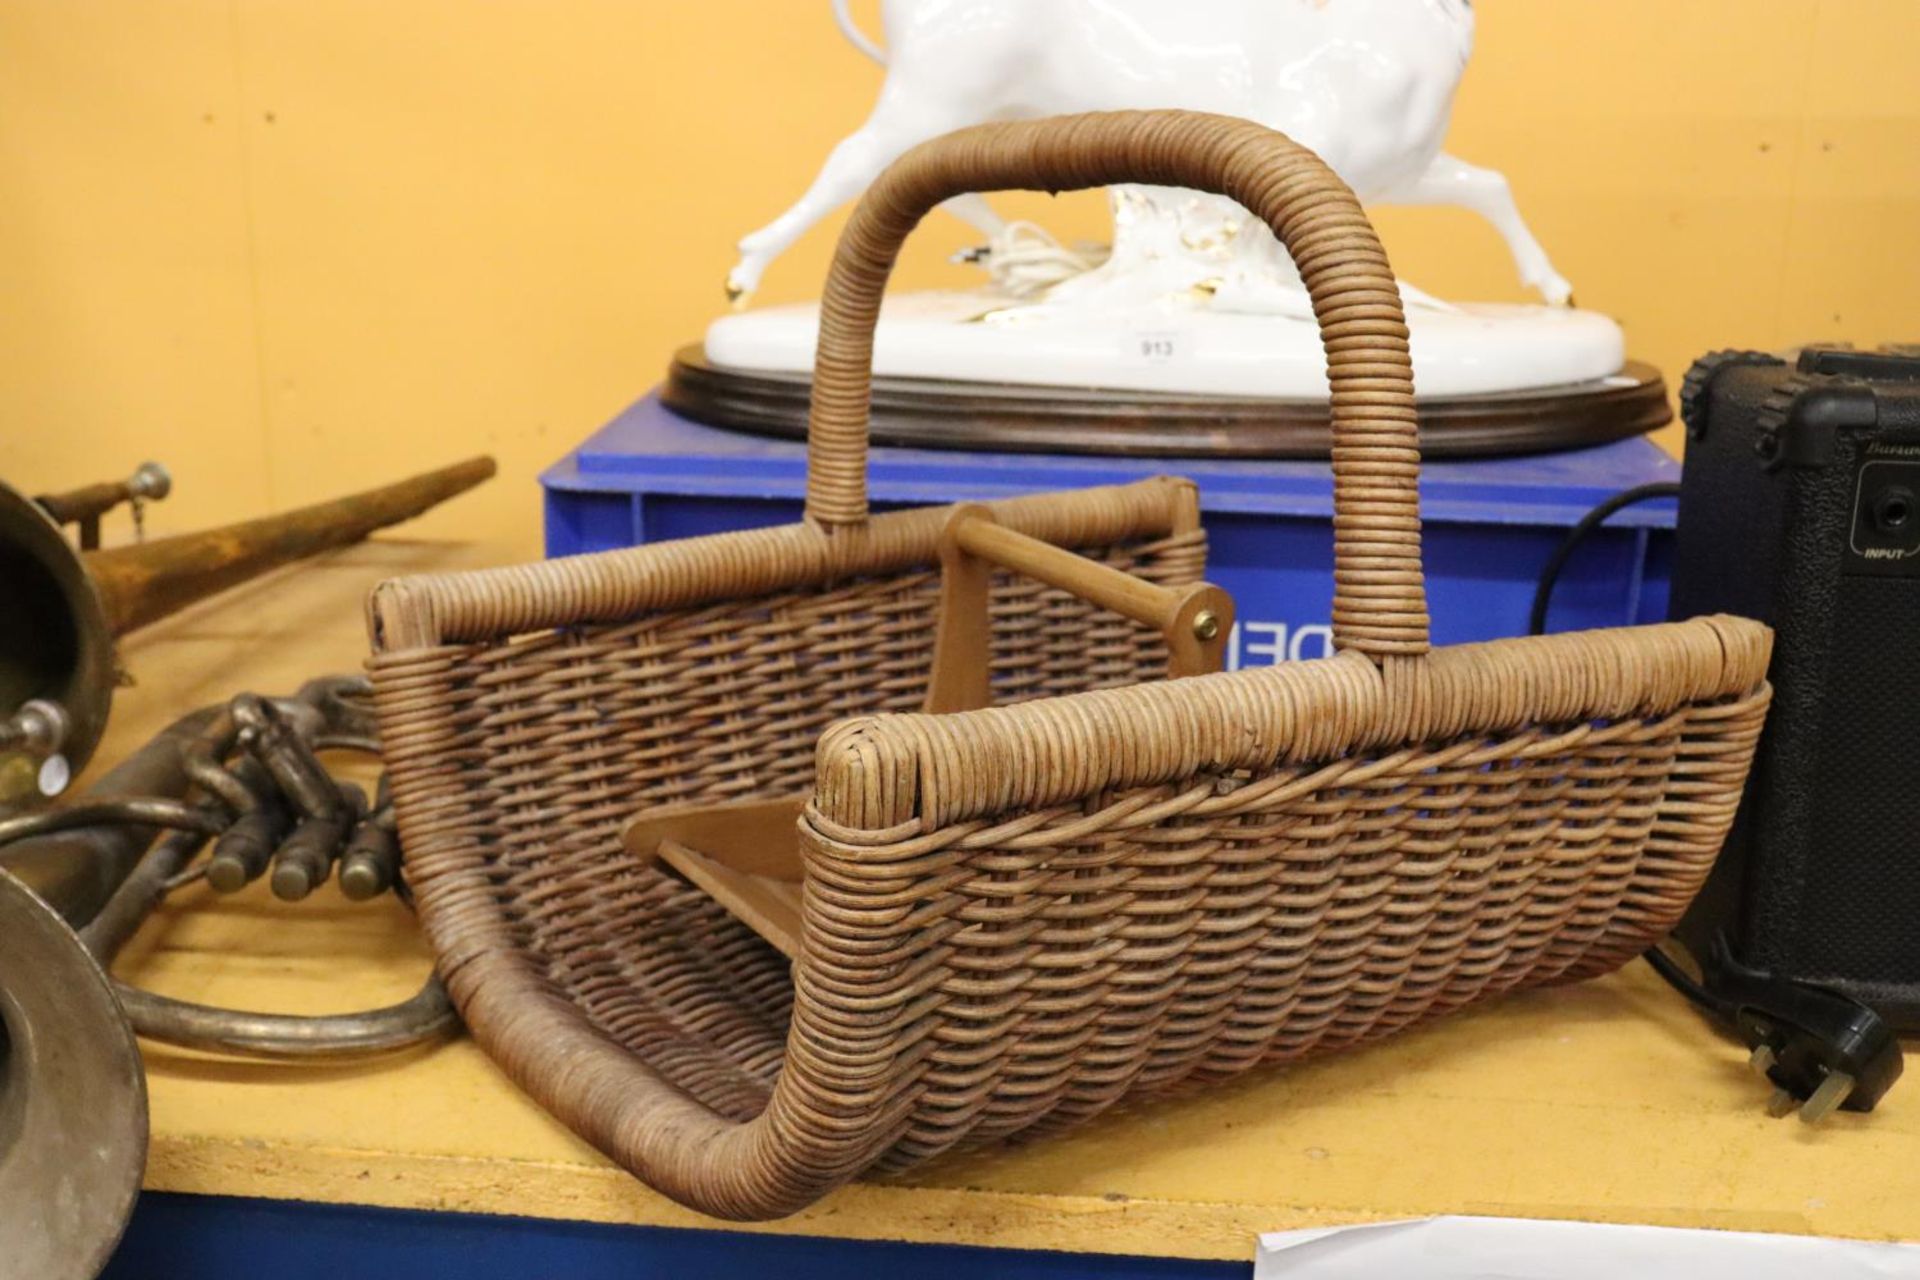 A LARGE BASKET TRUG AND A SMALLER WOODEN ONE - Image 2 of 5